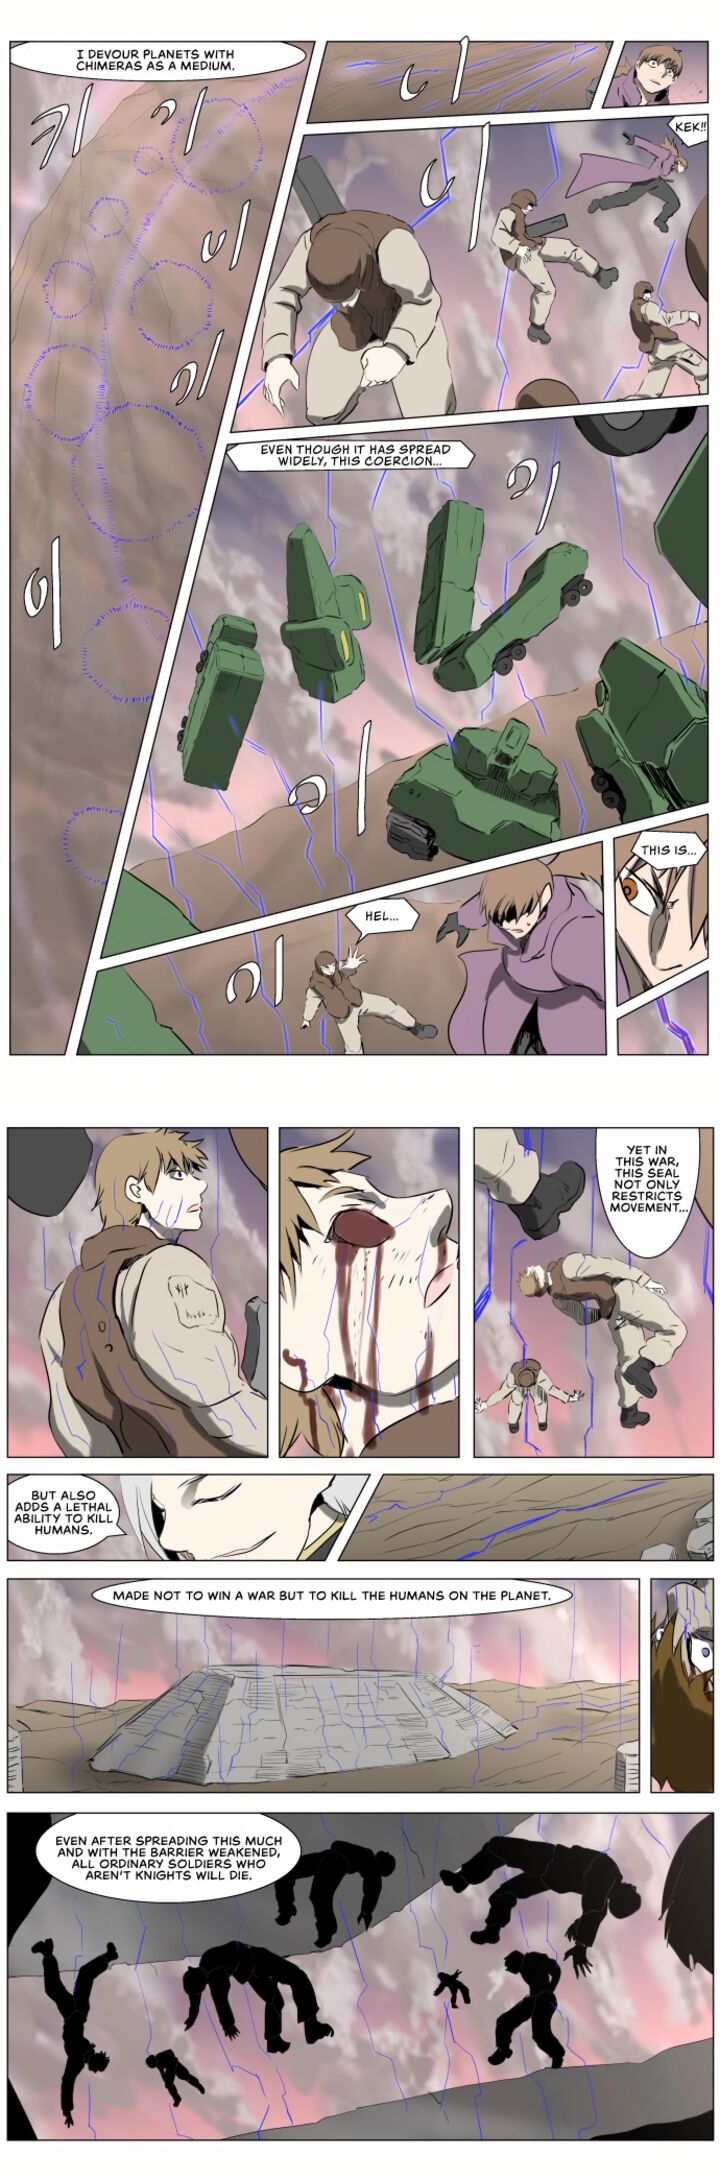 Knight Run Chapter 245 Page 5